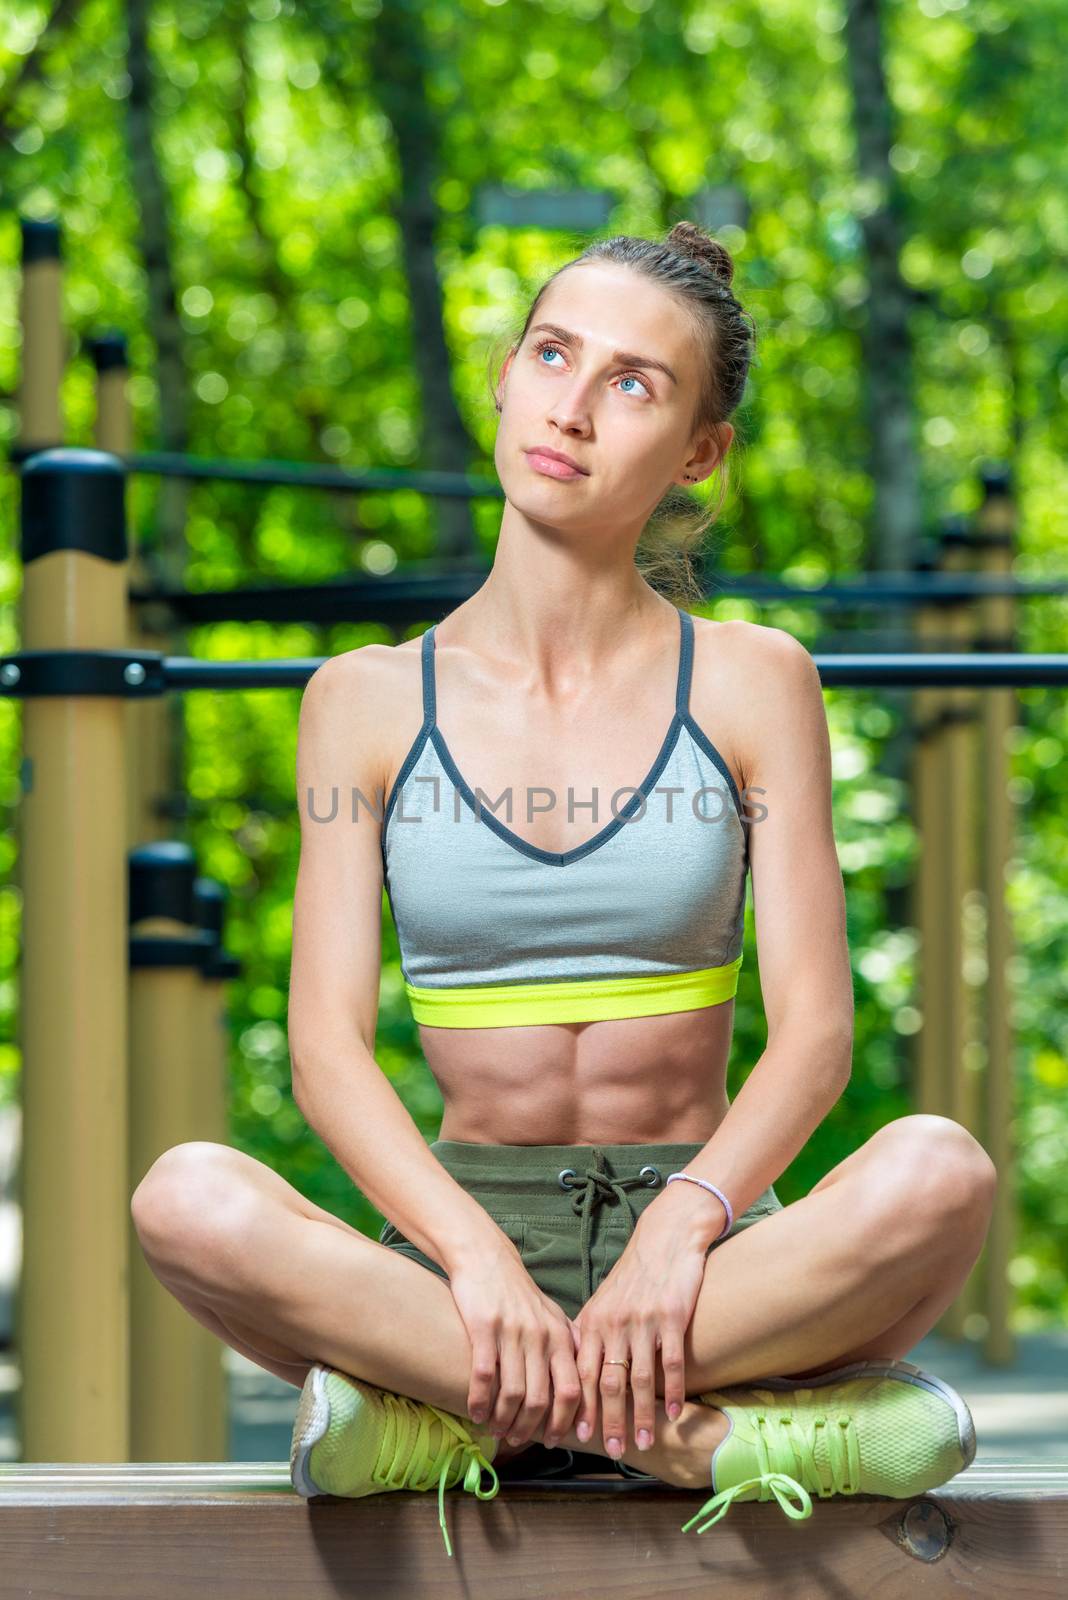 pensive girl athlete relaxes on the sports field, vertical portrait